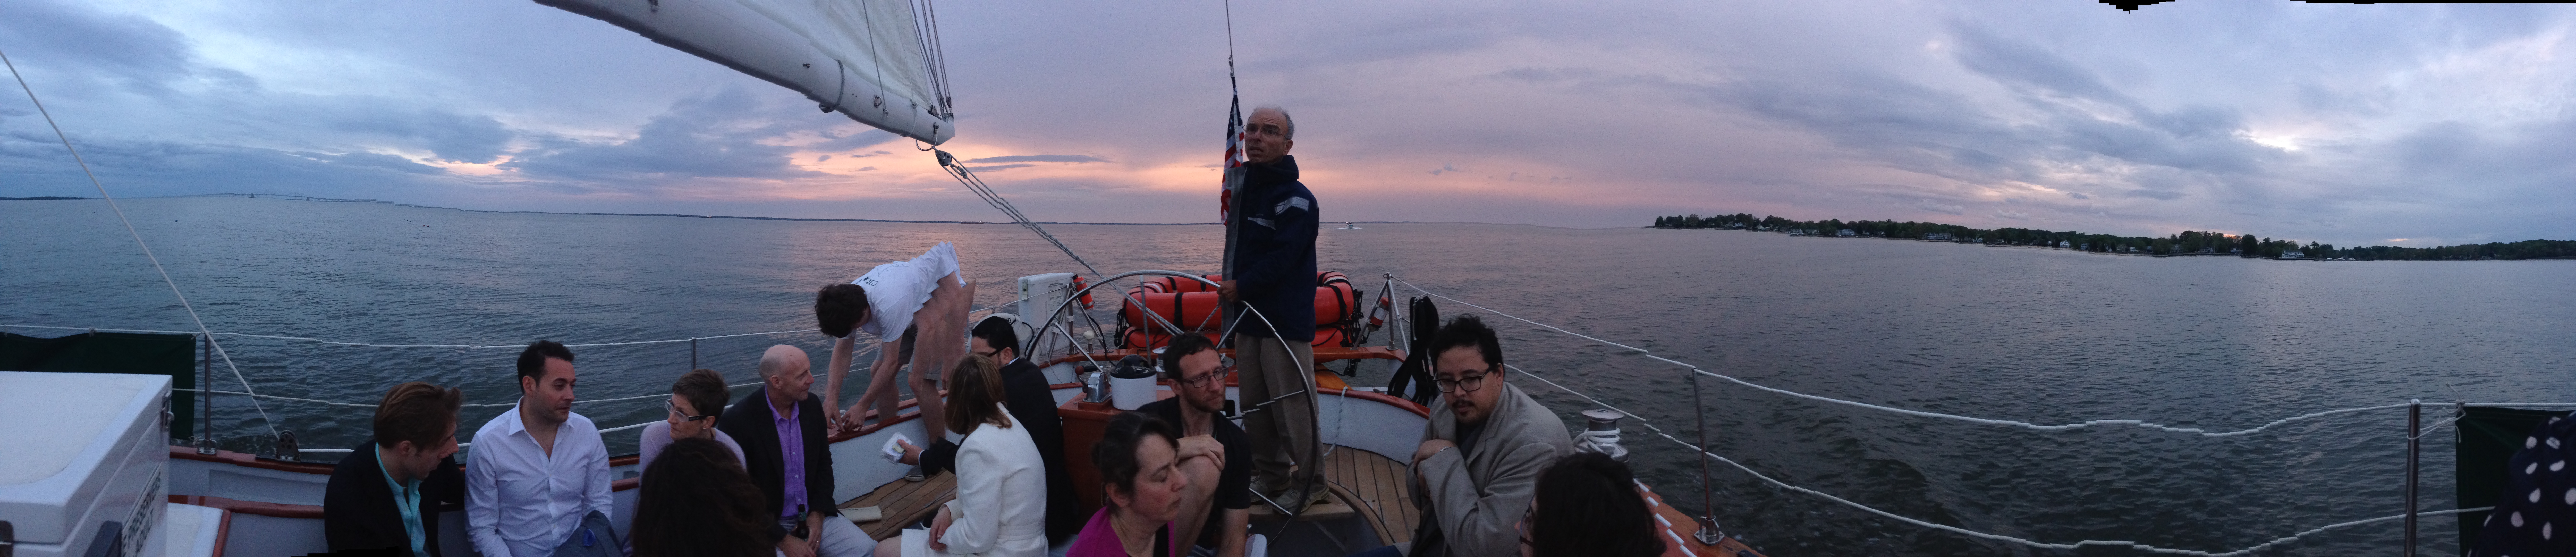 Guest on a cloudy sunset sail